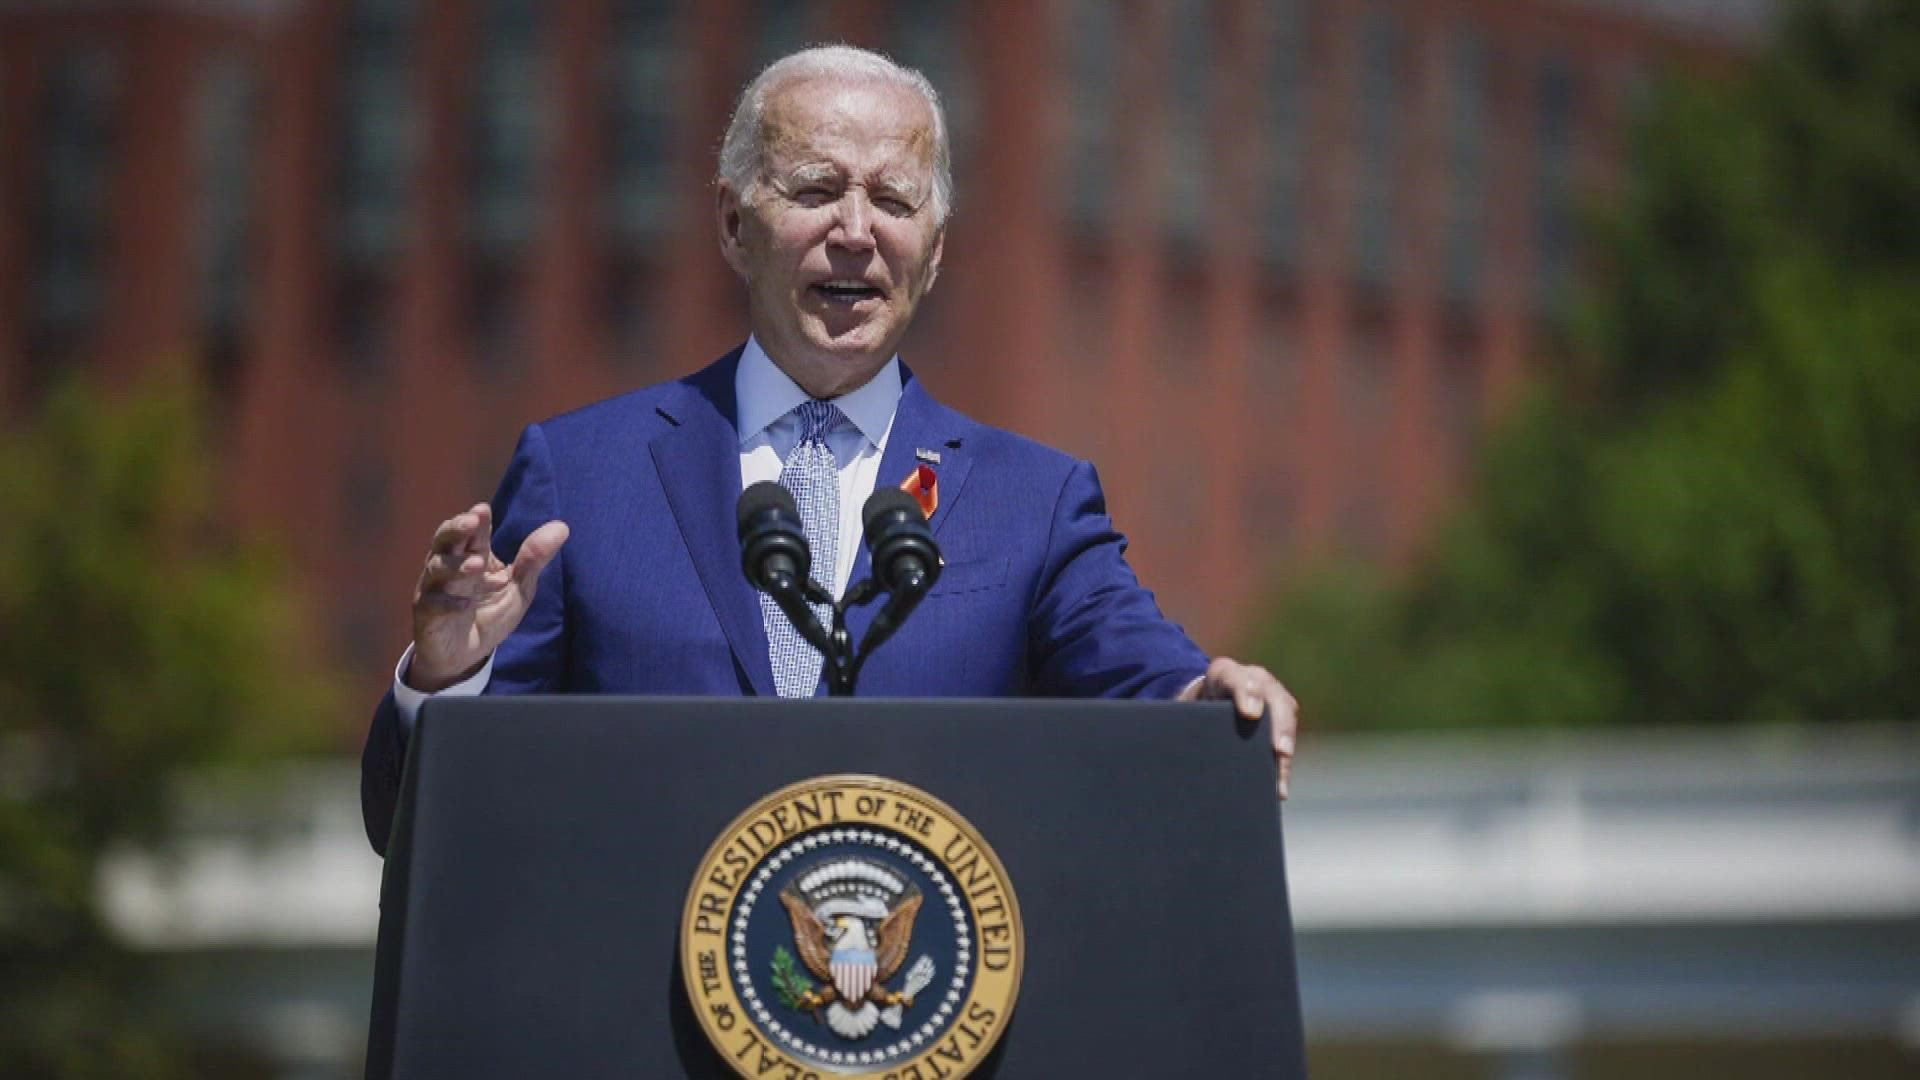 More than two years into the pandemic, President Biden has tested positive for COVID-19.